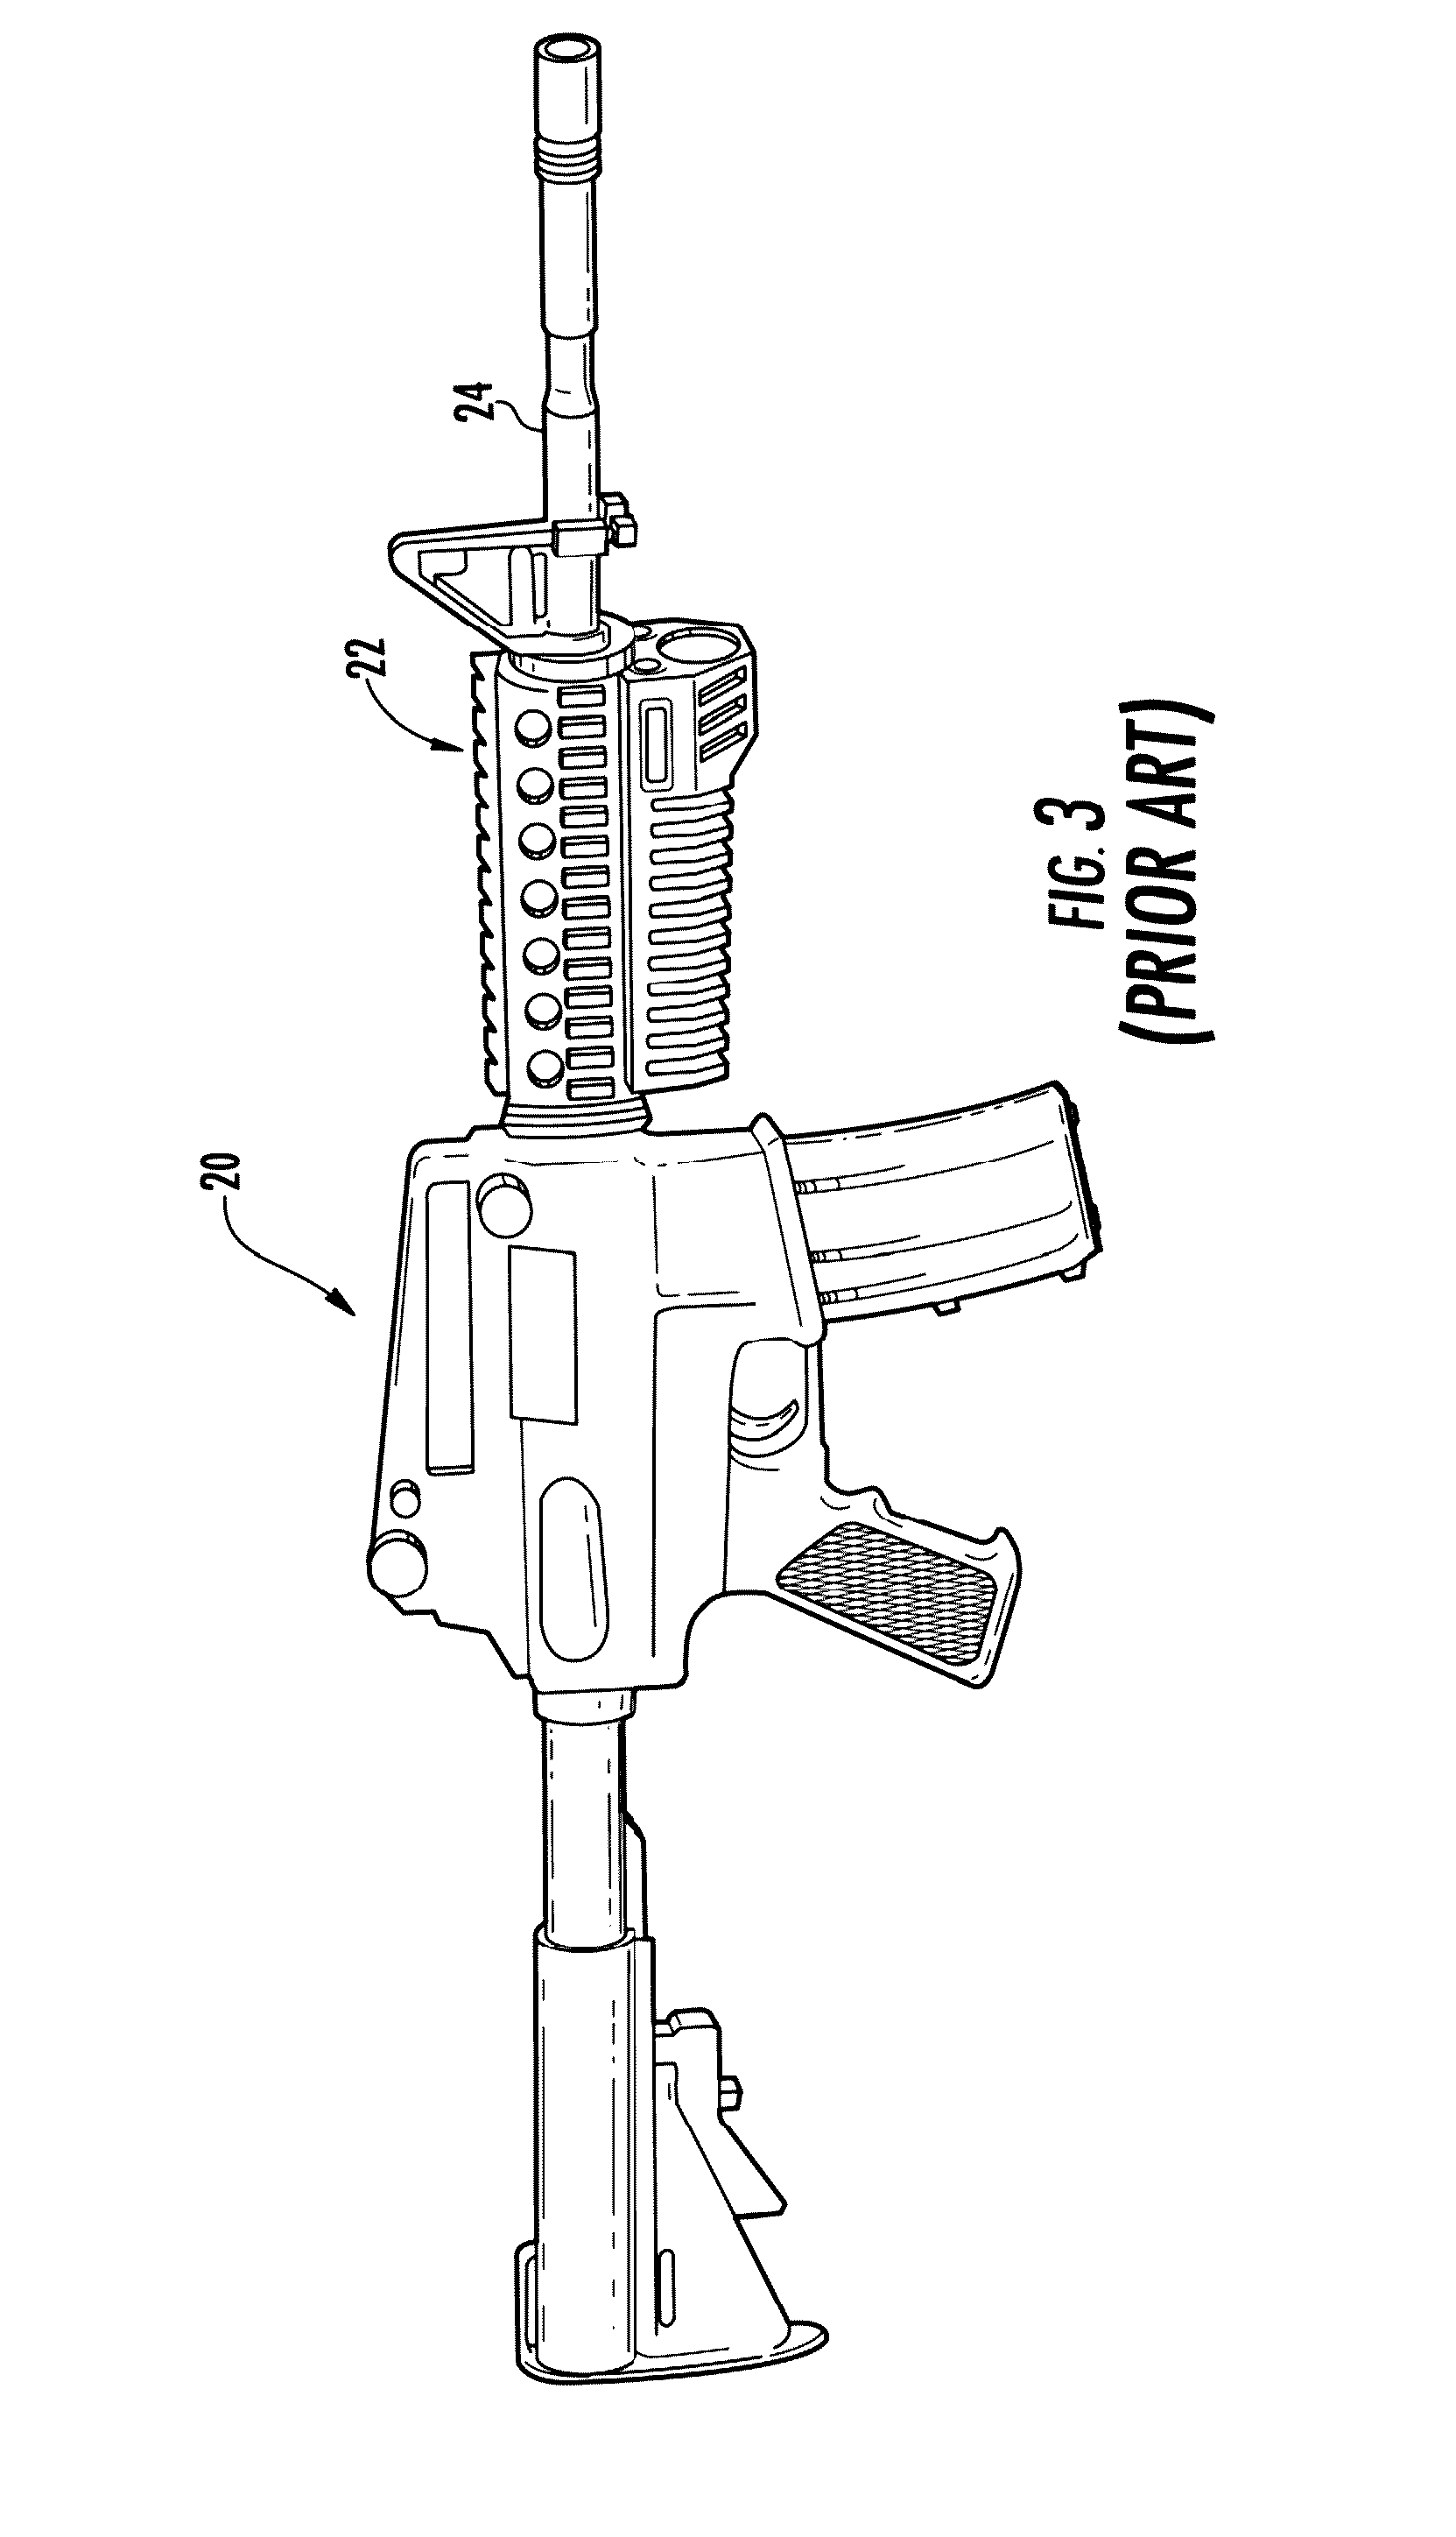 Weapon mounted light and operation thereof